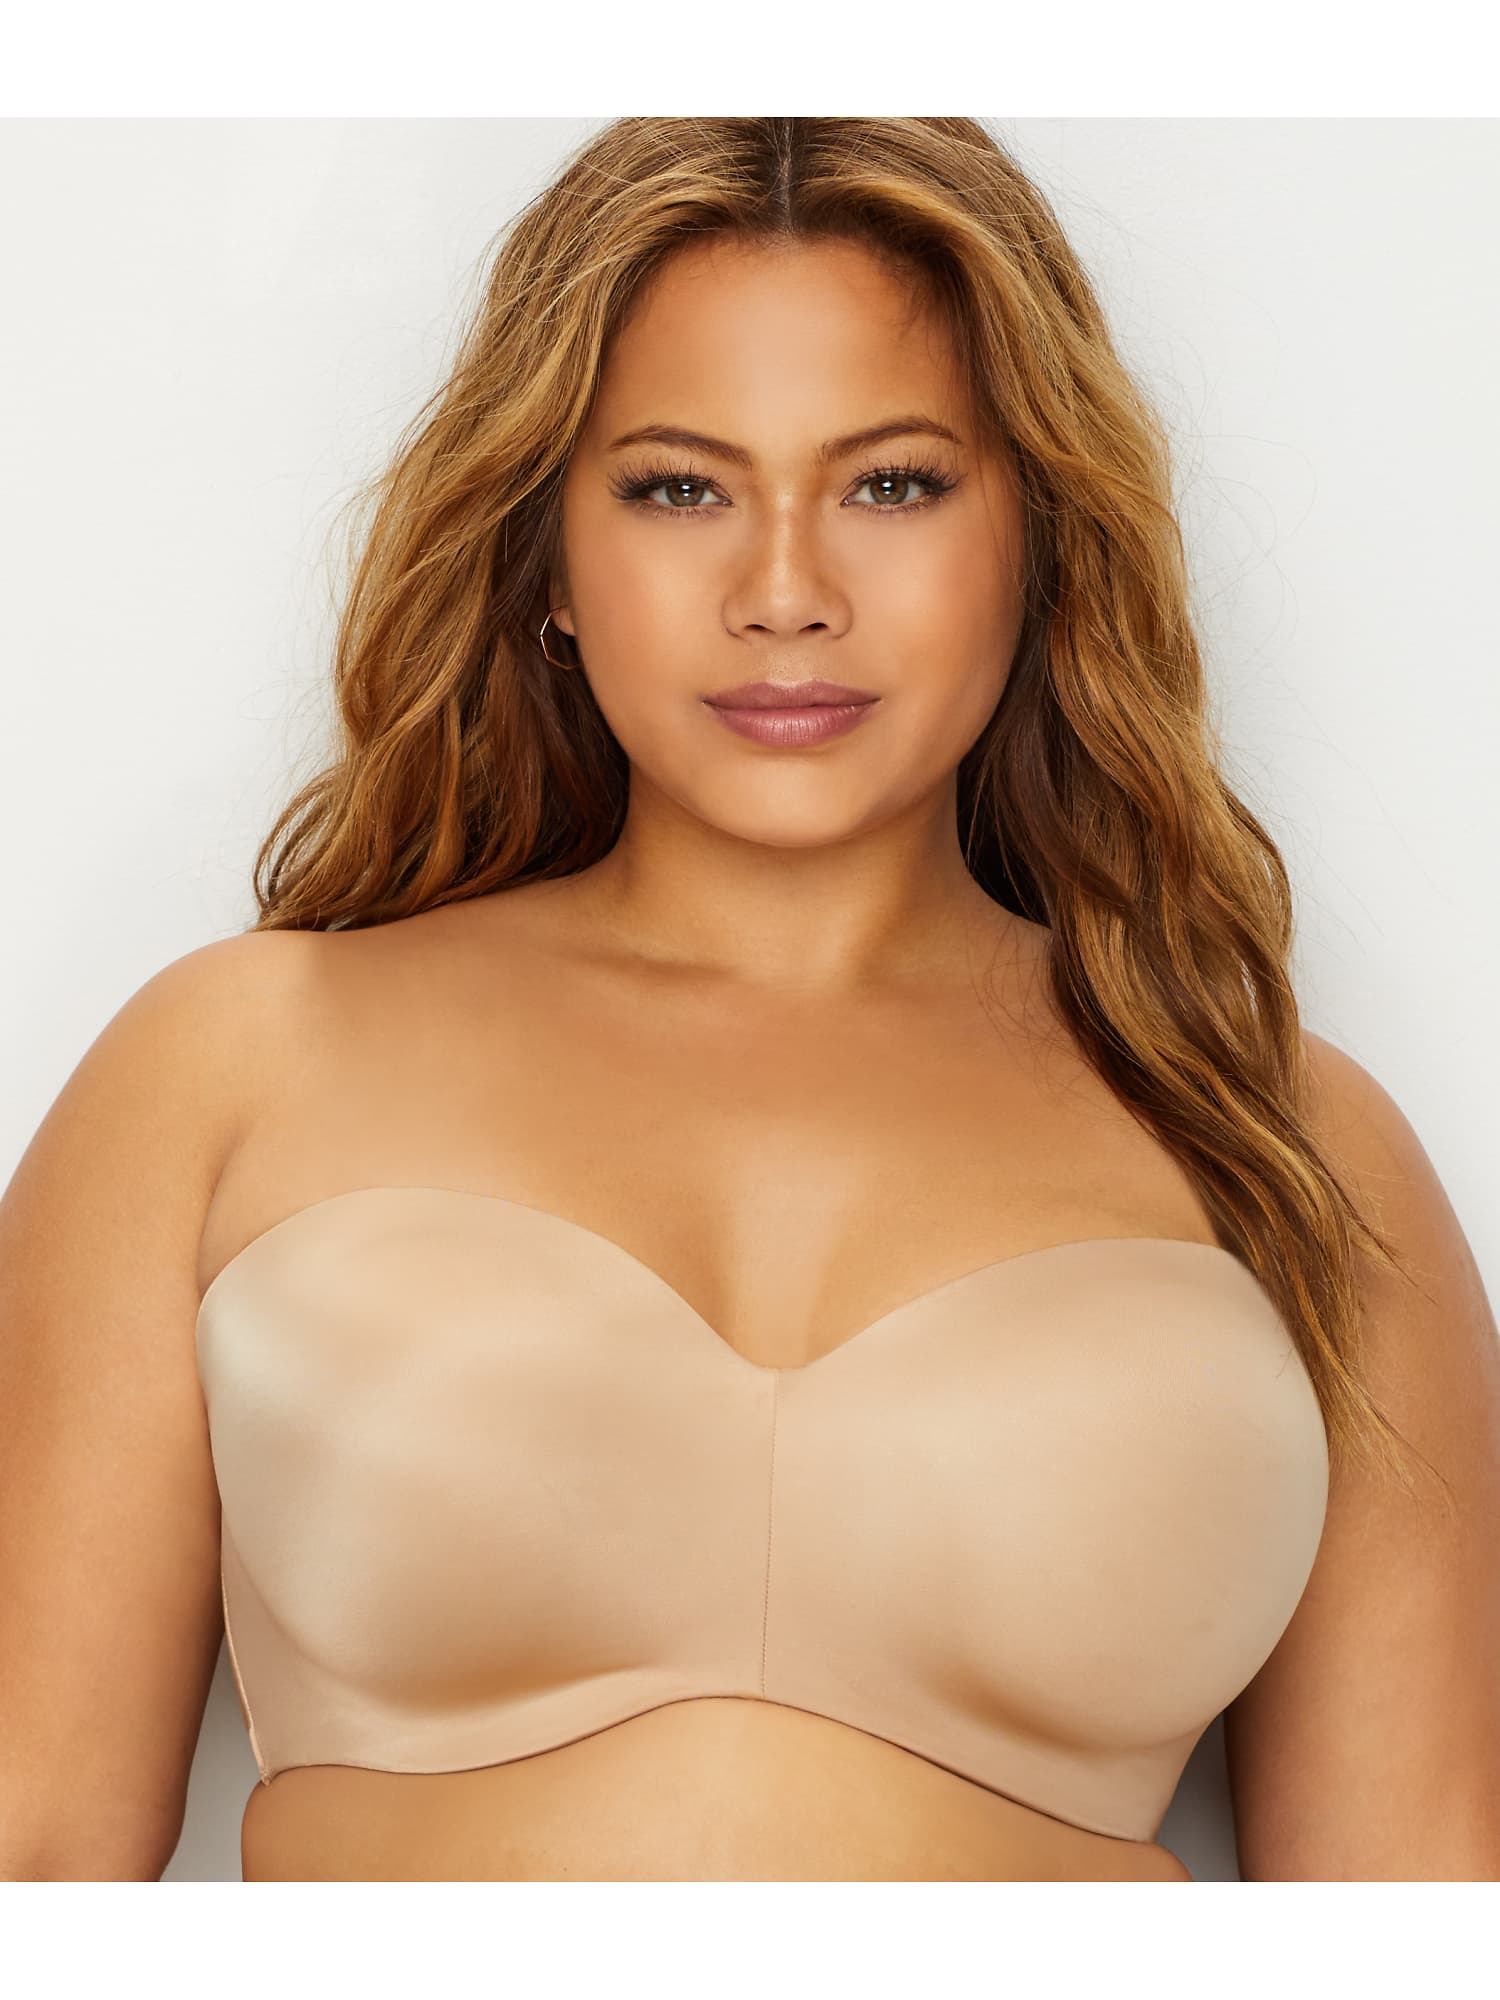 Curvy Couture Smooth Multiway Strapless Bra - Women's